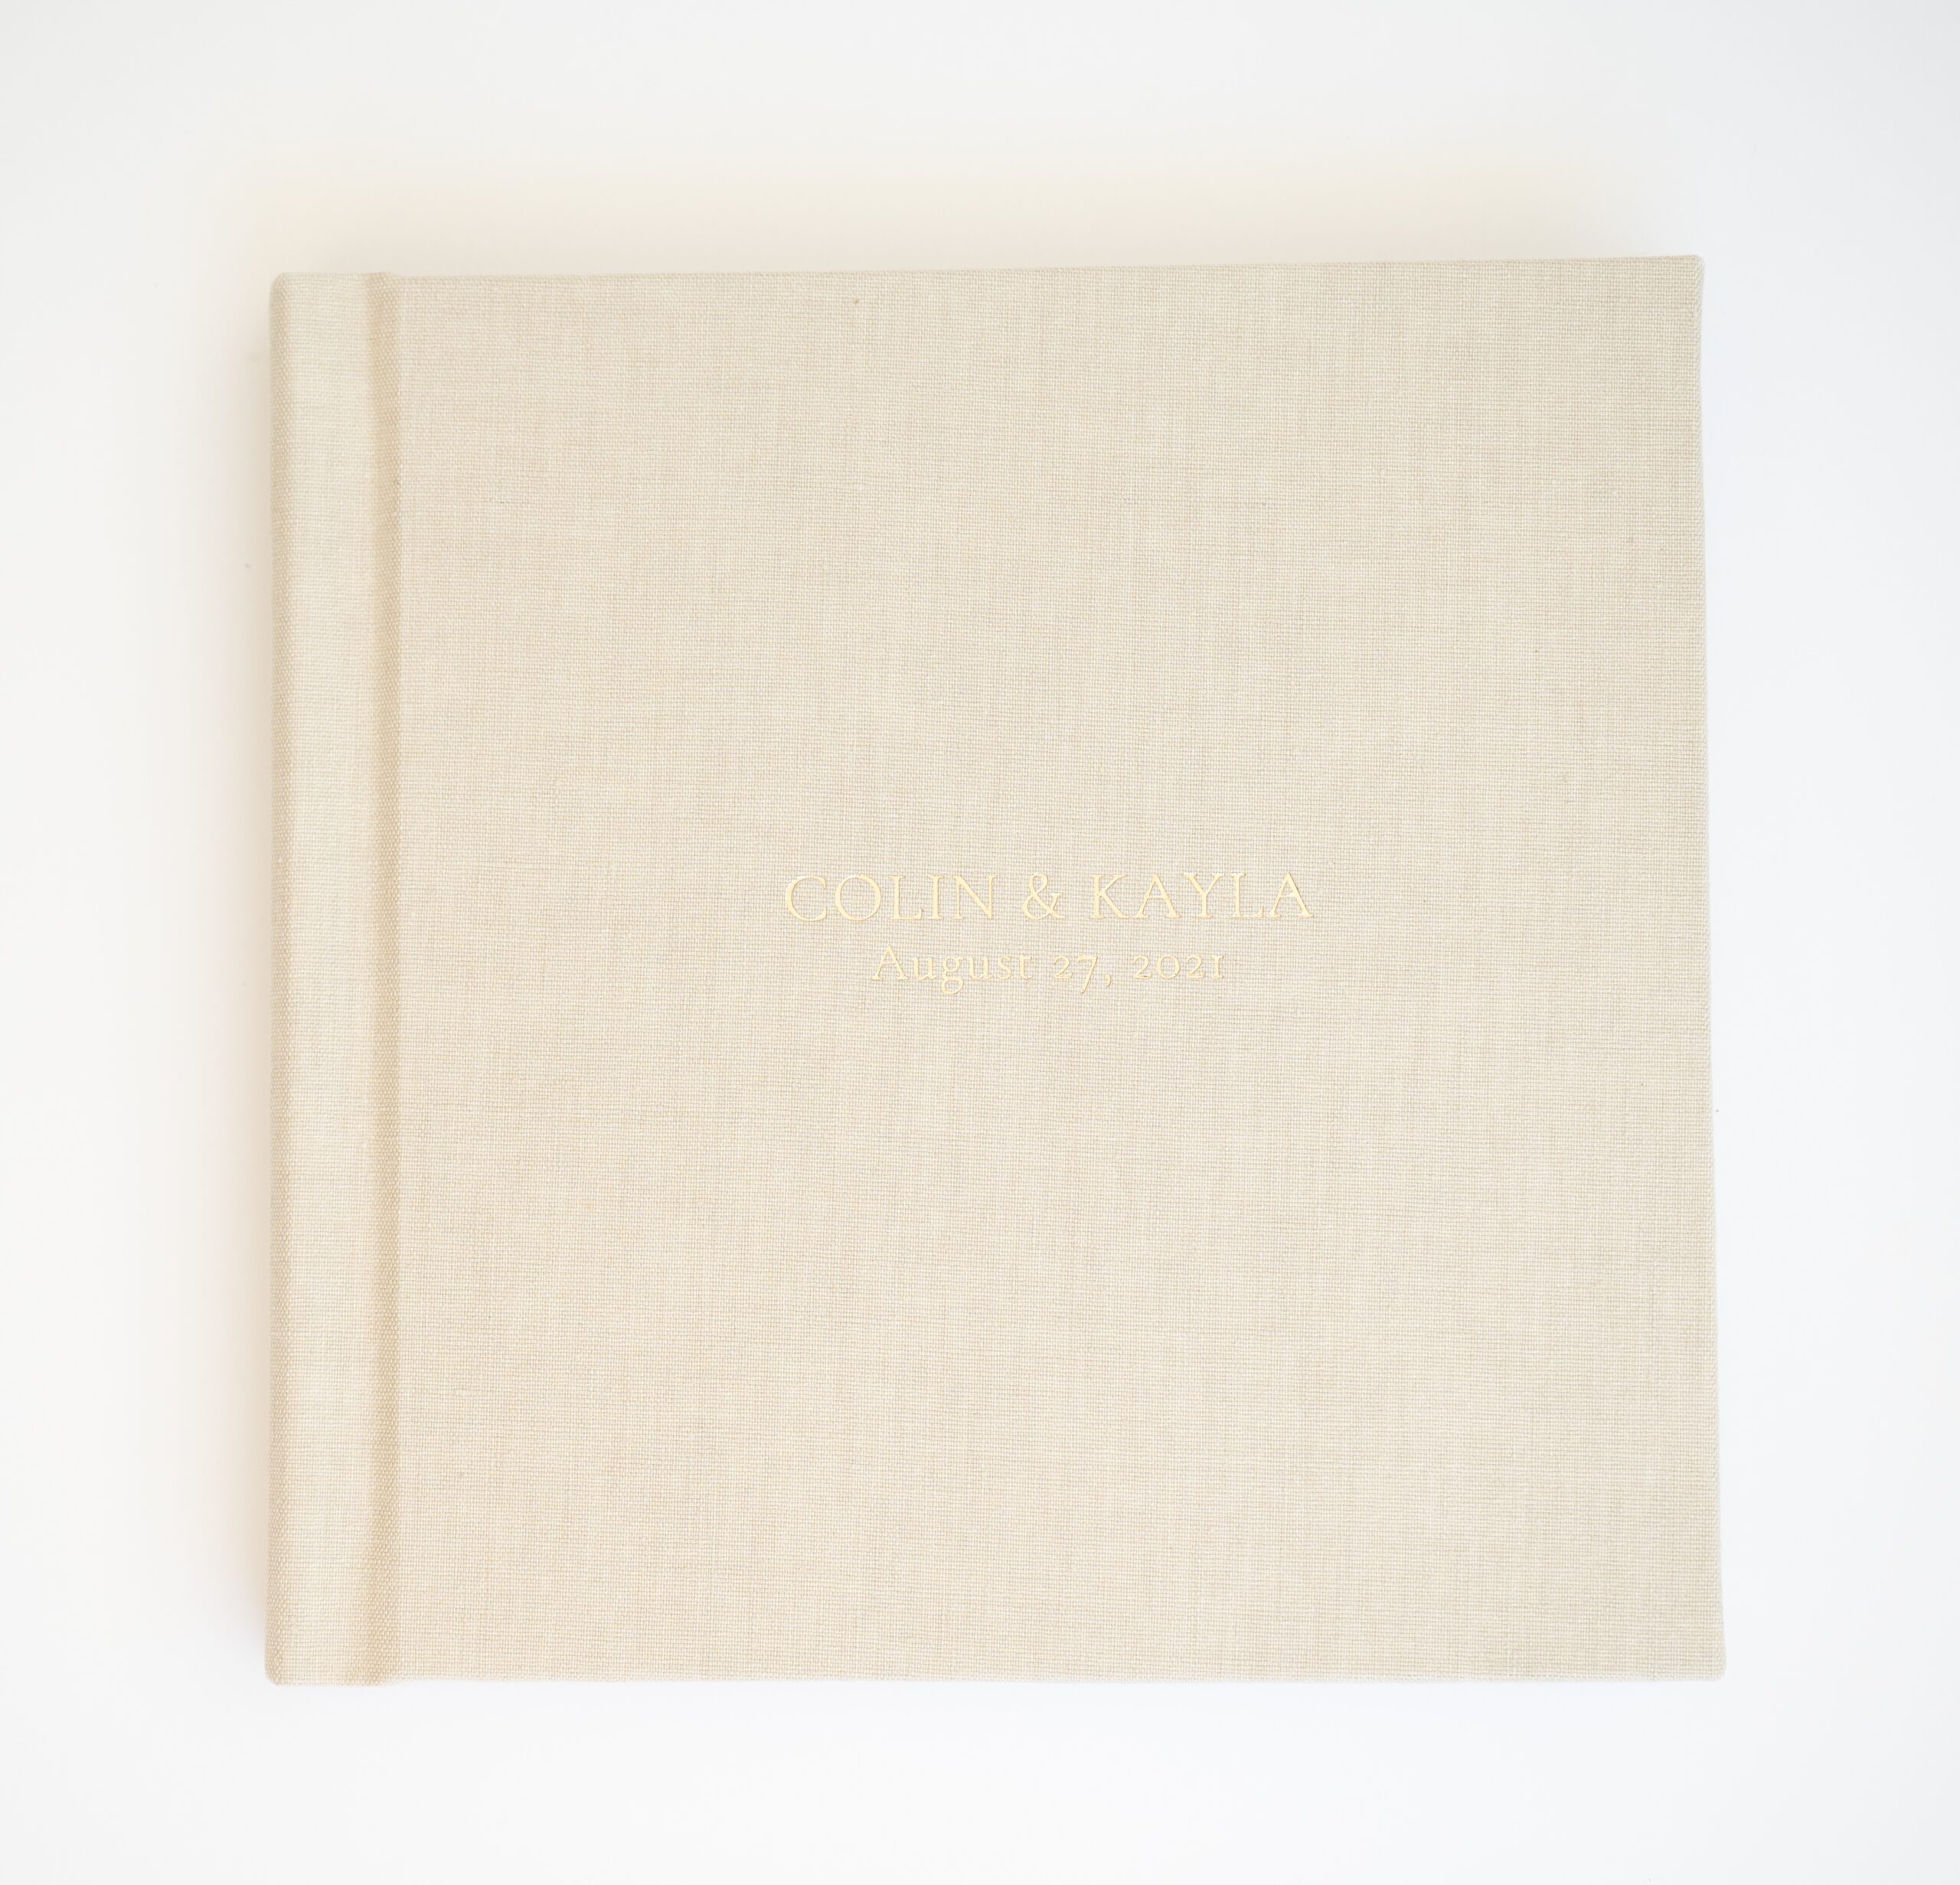 linen album with gold text example